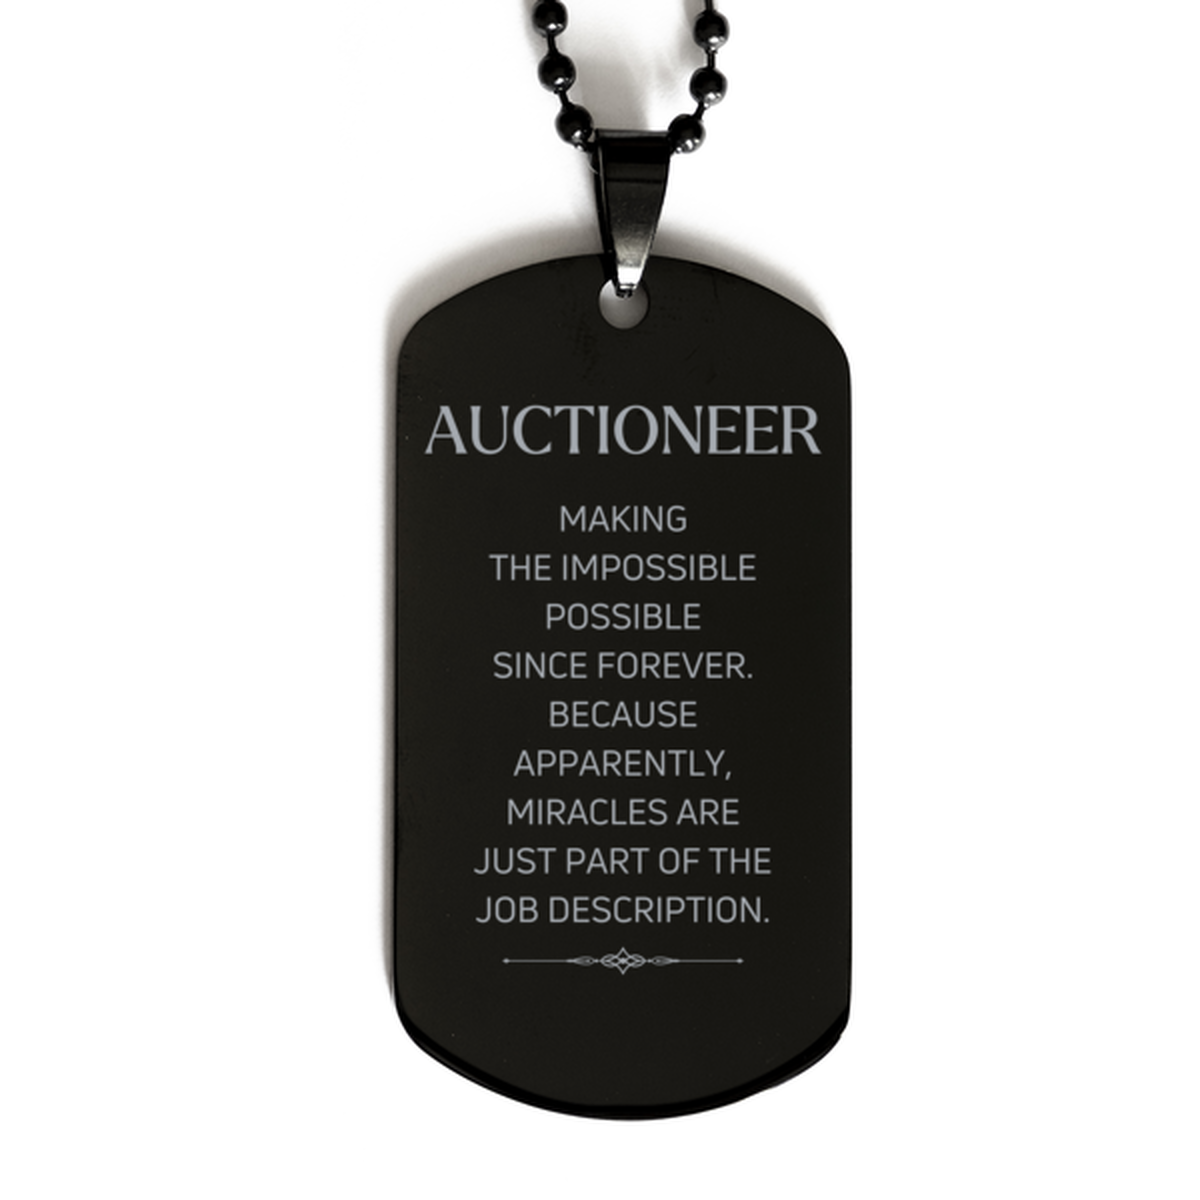 Funny Auctioneer Gifts, Miracles are just part of the job description, Inspirational Birthday Black Dog Tag For Auctioneer, Men, Women, Coworkers, Friends, Boss